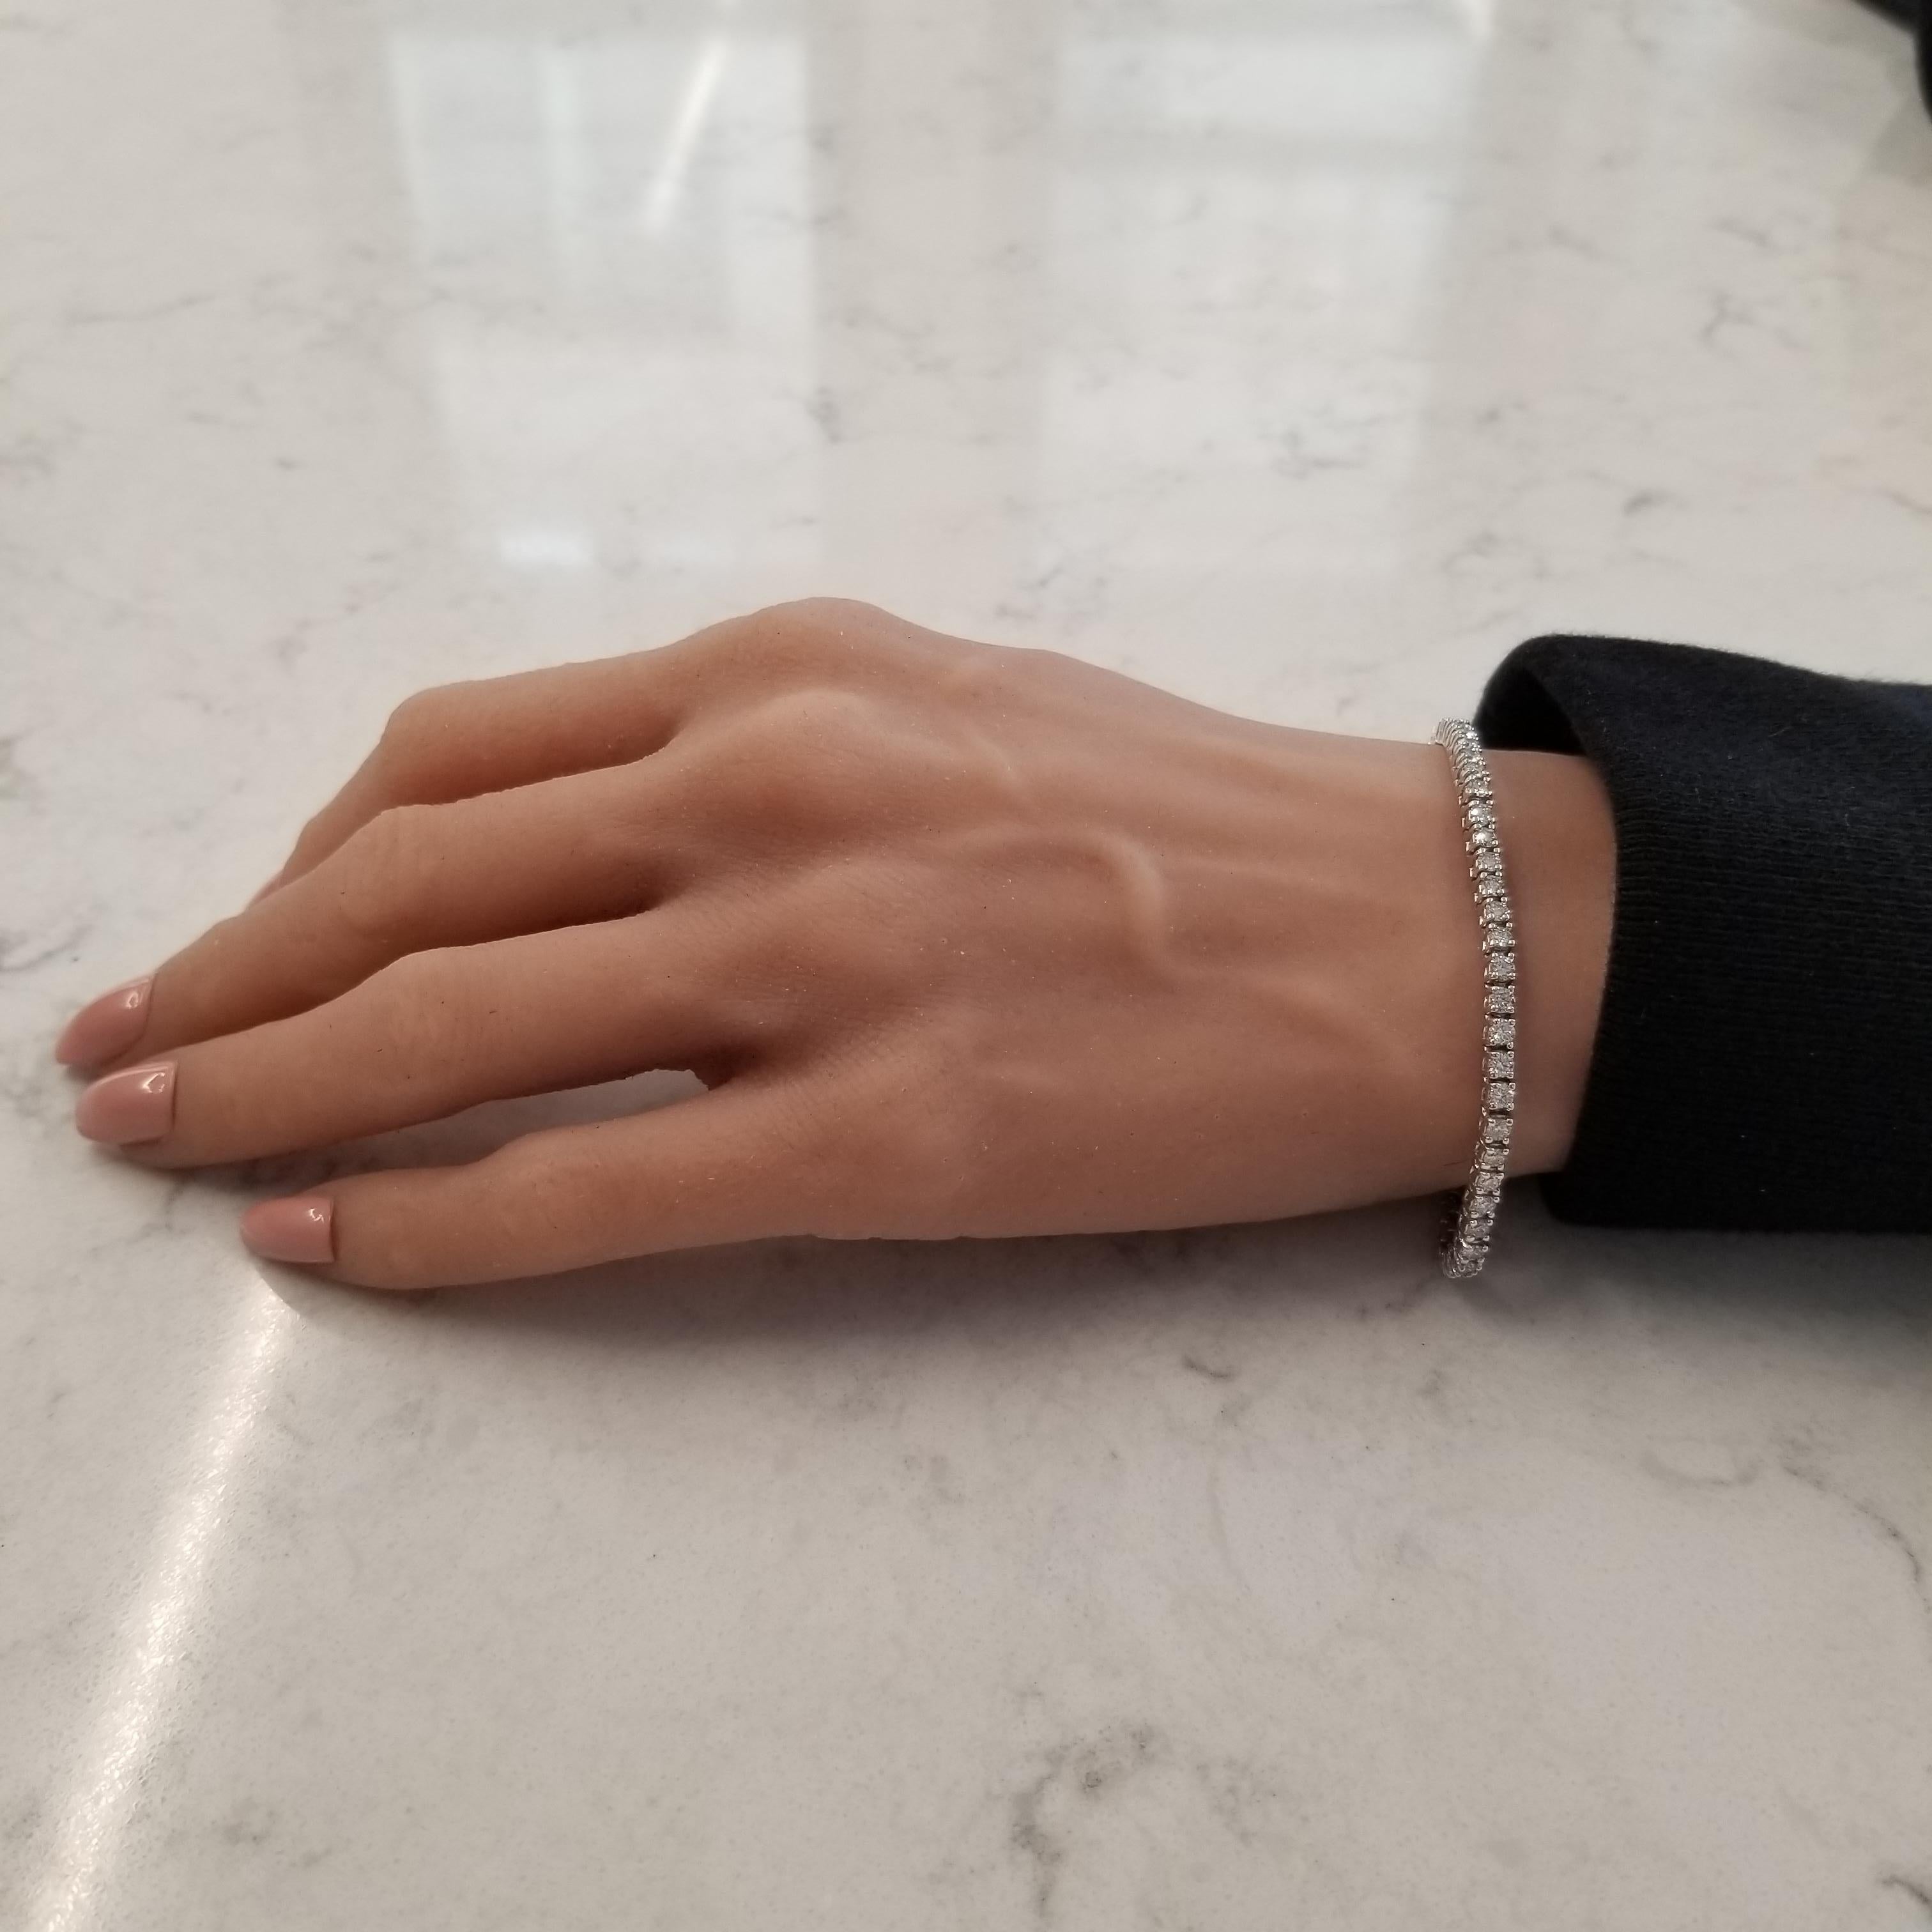 This spectacular brightly polished 14 karat white gold tennis bracelet showcases a stunning 2.01 carats of round brilliant cut diamonds. A total of 78 diamonds that measure 2.00mm in diameter each are prong set into beautiful basket links on this